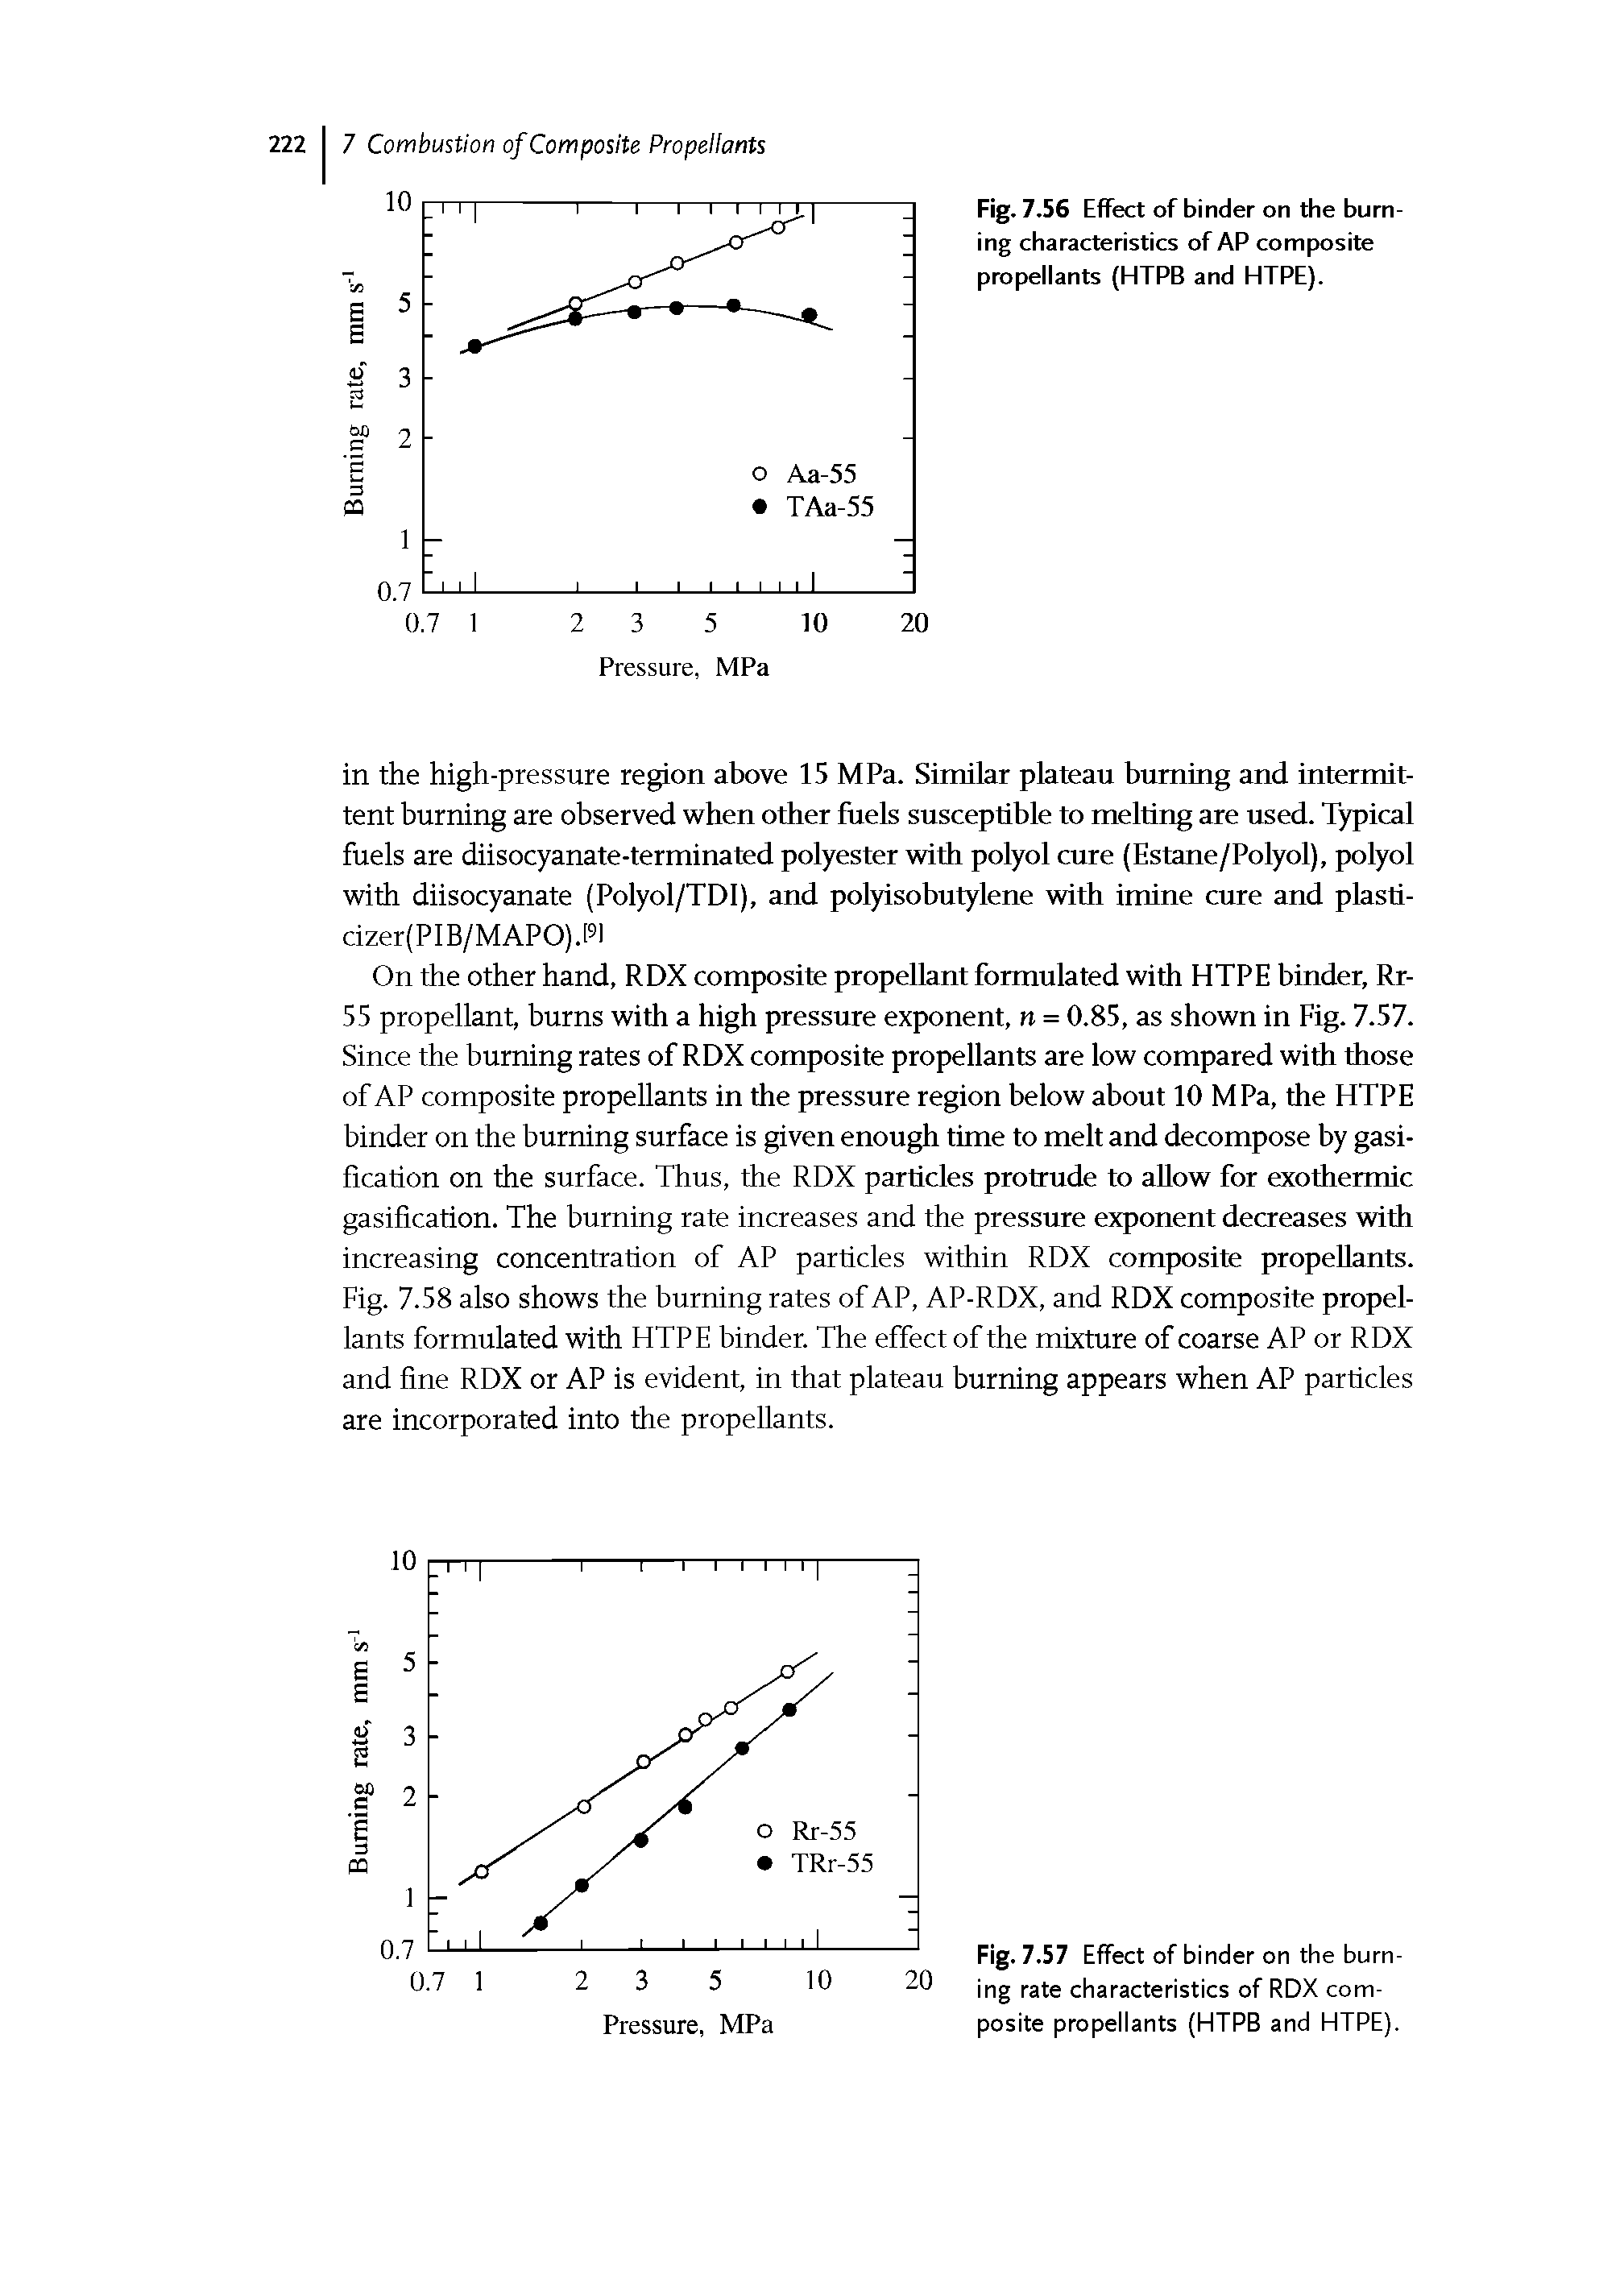 Fig. 7.56 Effect of binder on the burning characteristics of AP composite propellants (HTPB and HTPE).